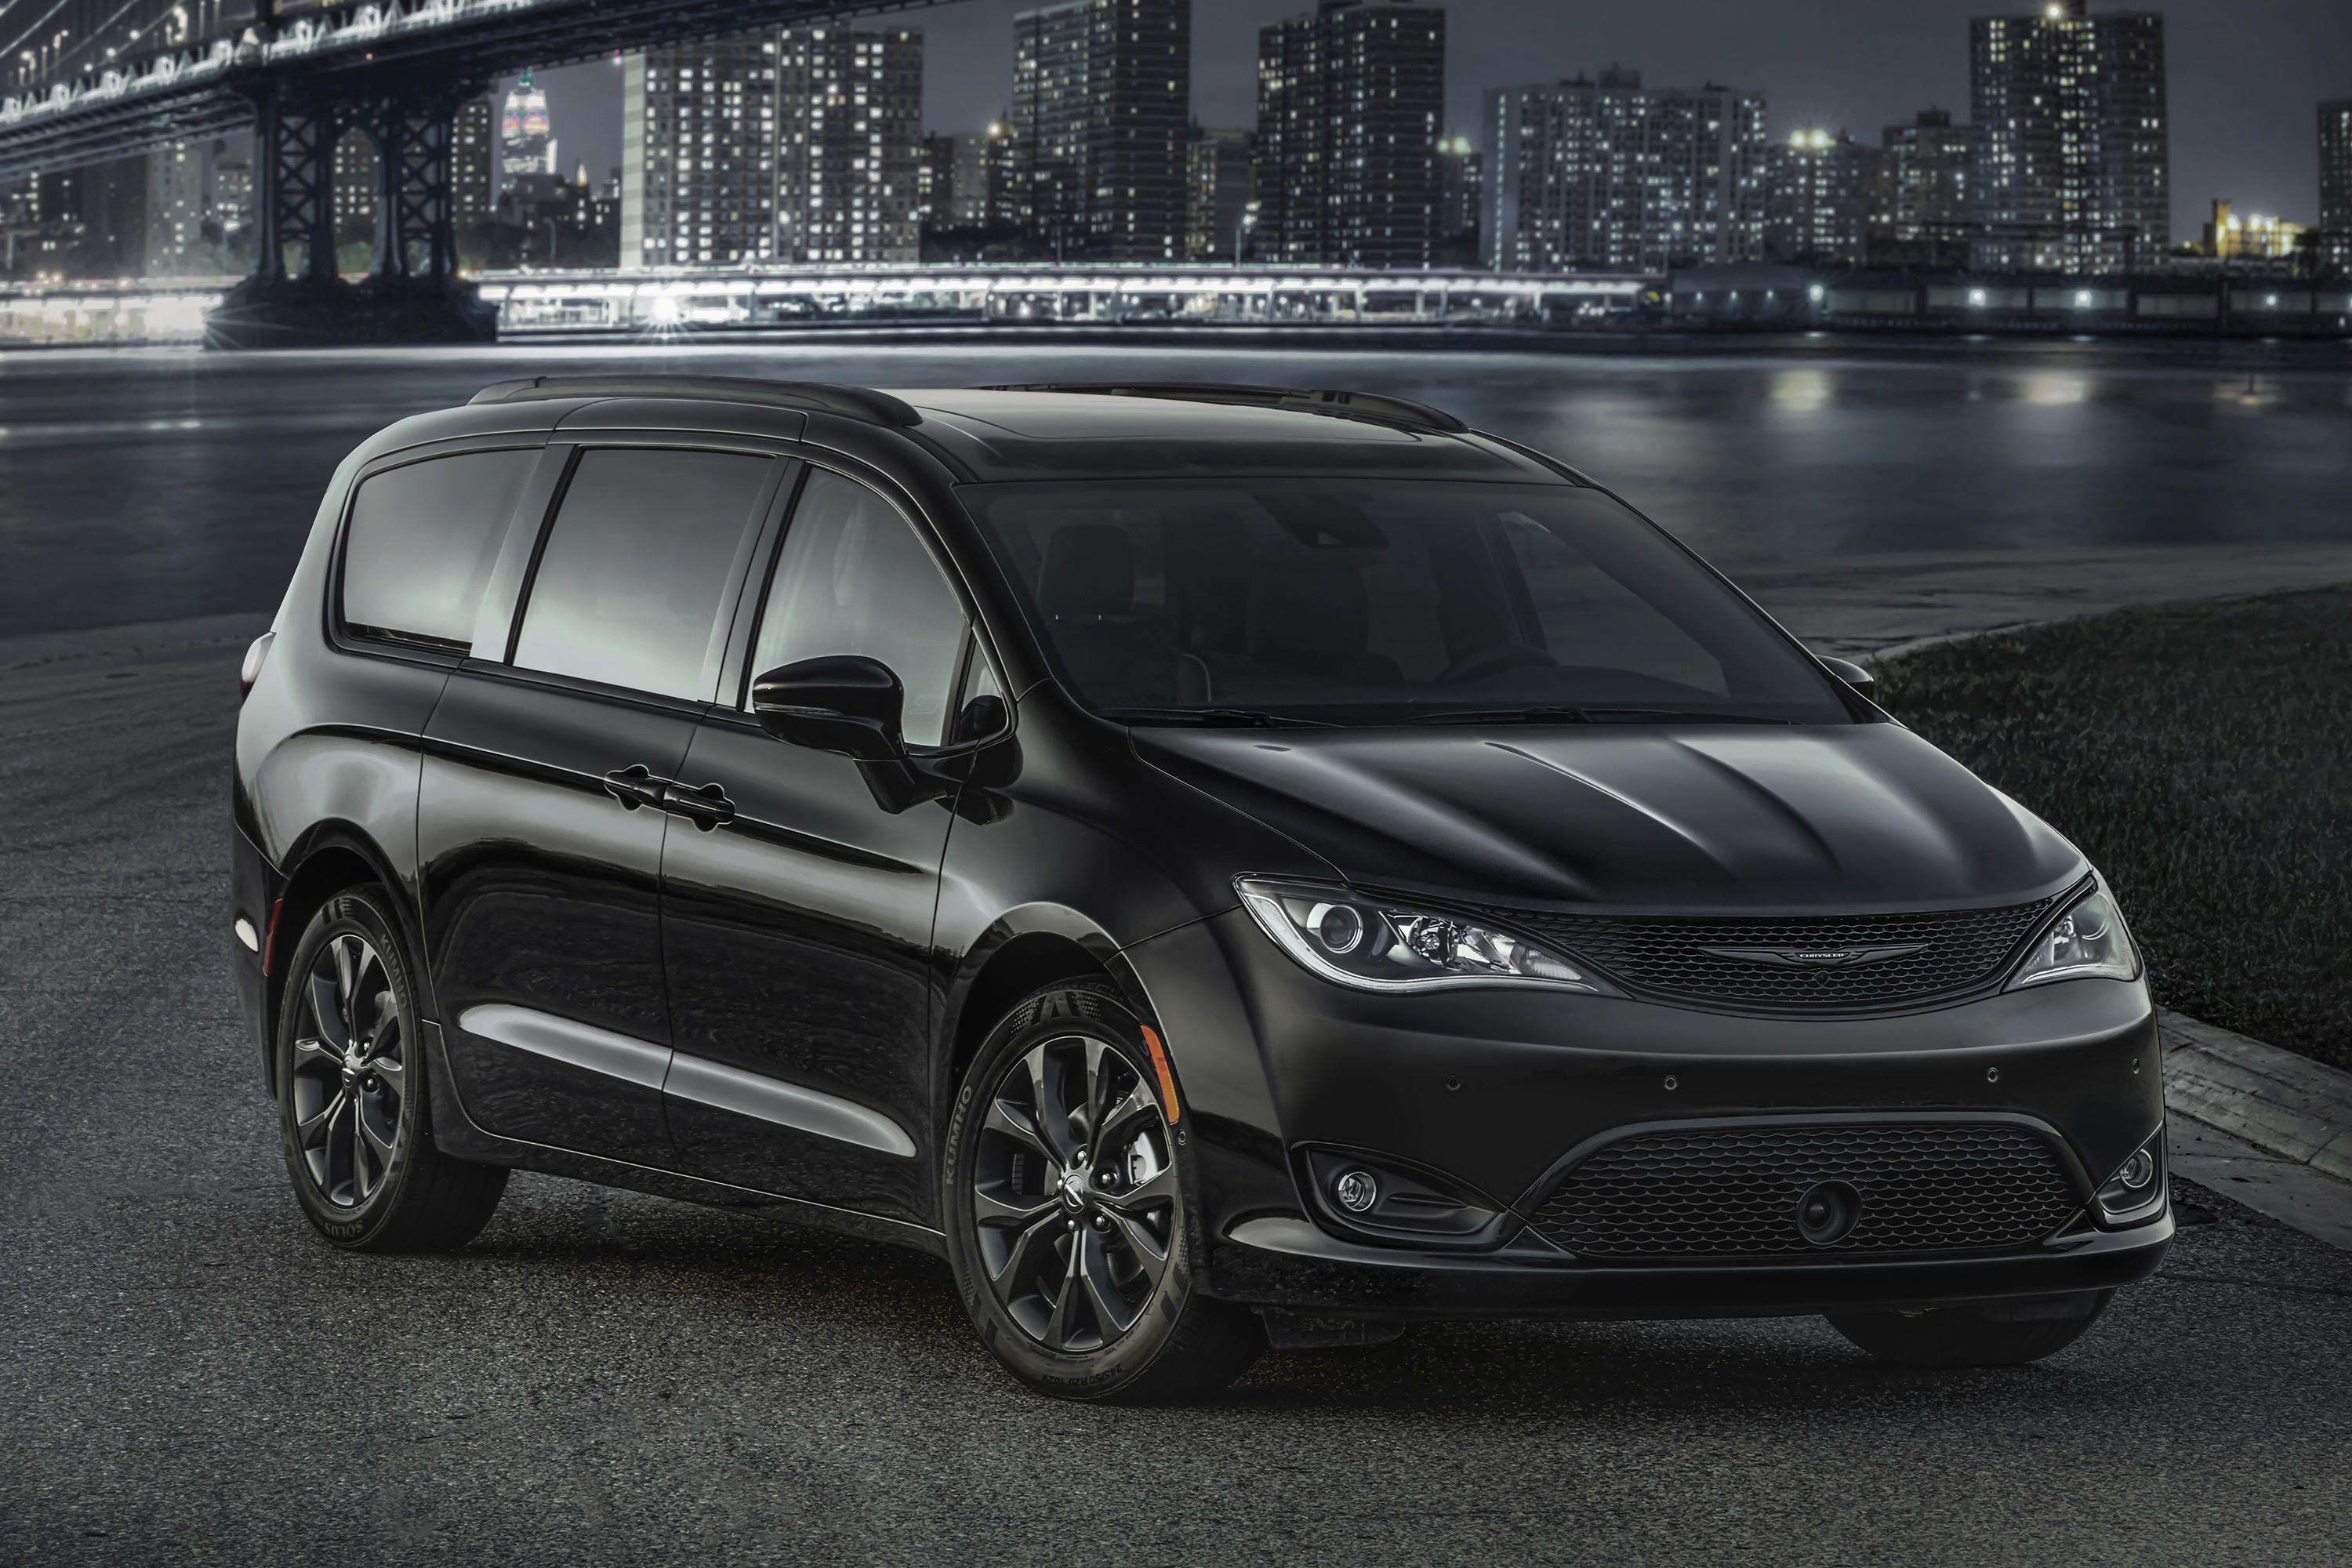 New S Appearance Package Offers Sporty Look for 2018 Chrysler Pacifica